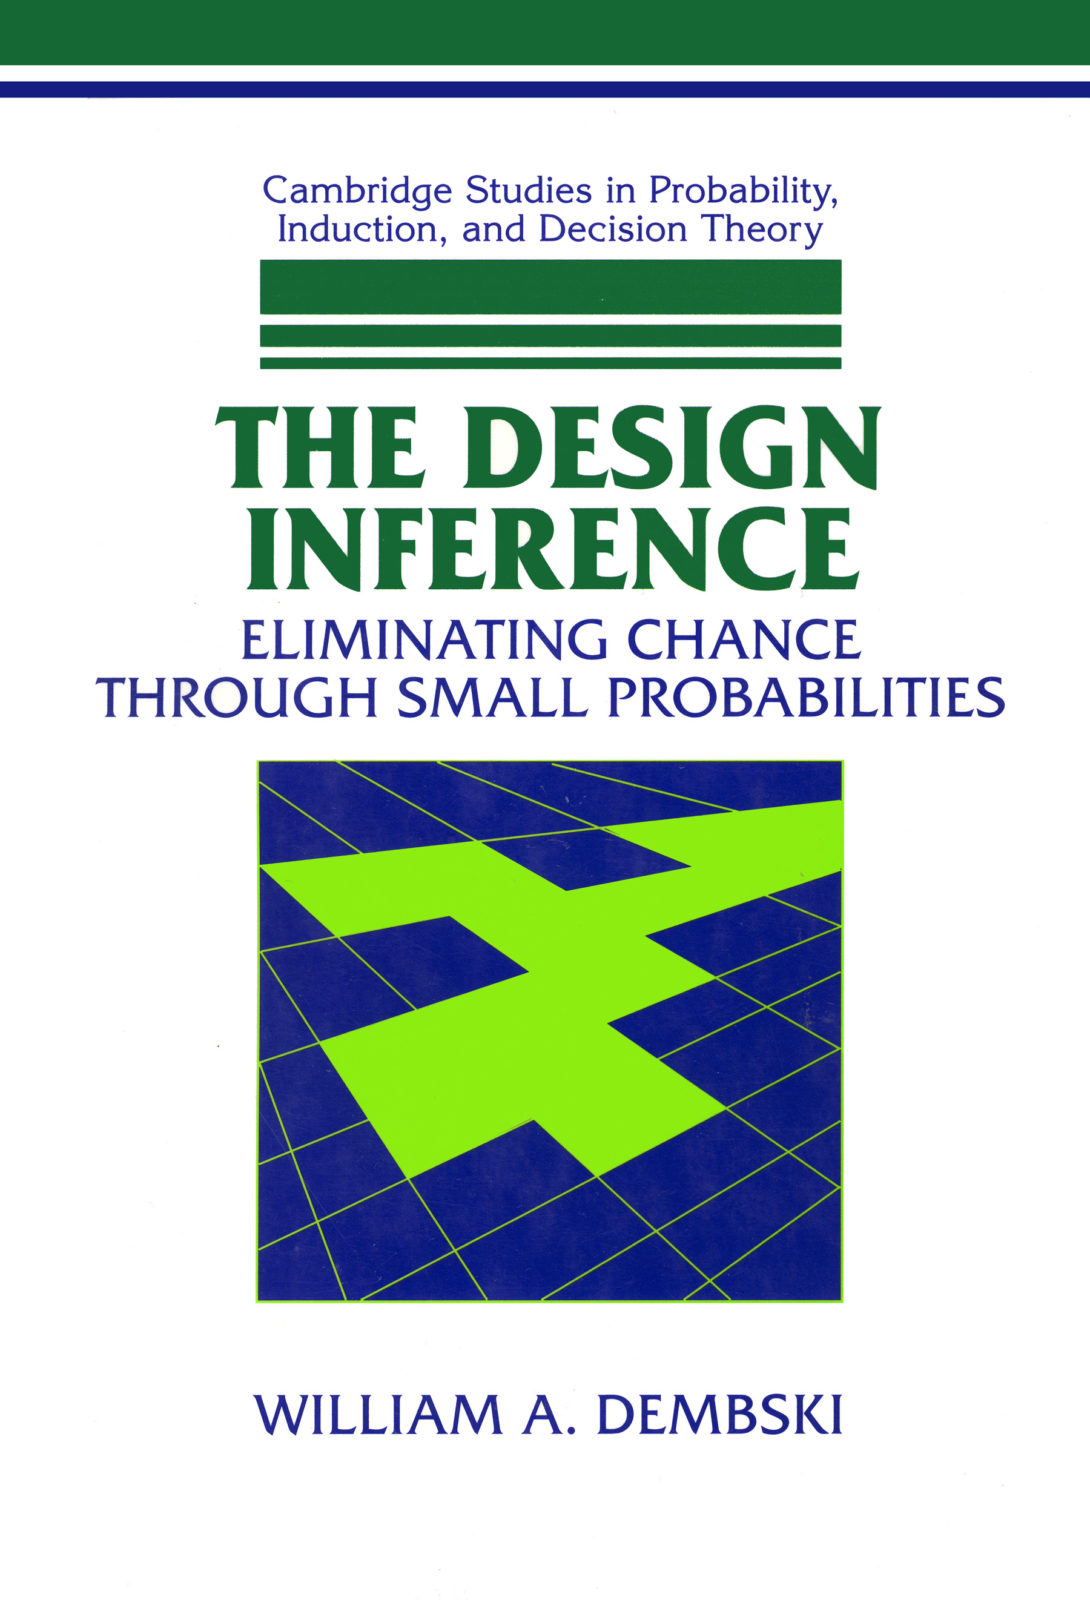 Book cover of the Design Inference by William A. Dembski